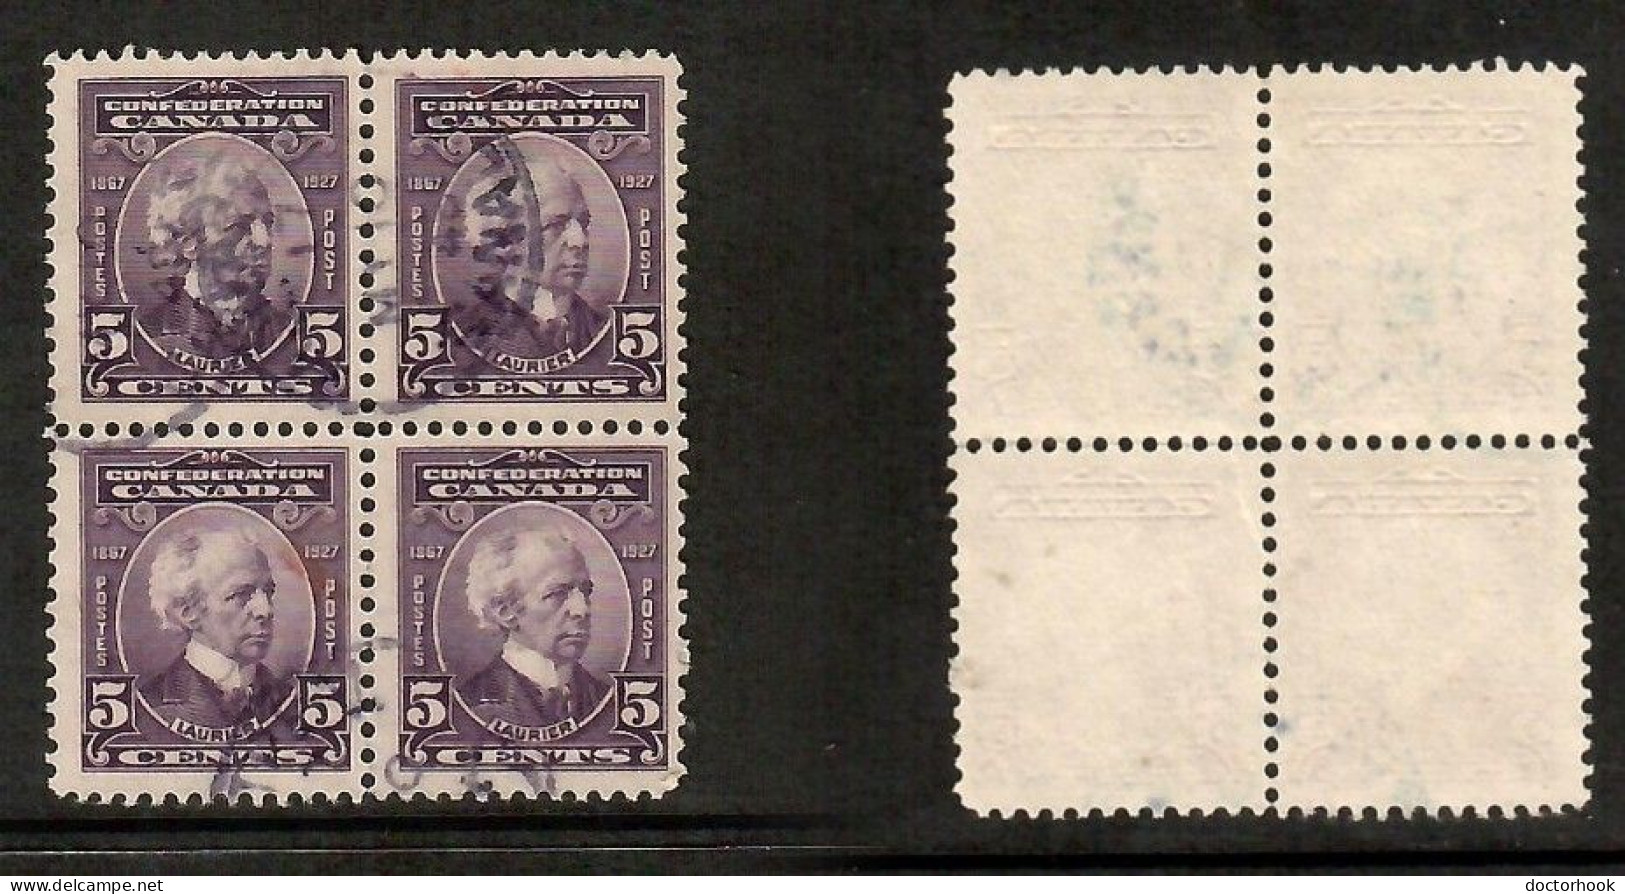 CANADA   Scott # 144 USED BLOCK Of 4 (CONDITION AS PER SCAN) (CAN-207) - Blocks & Sheetlets